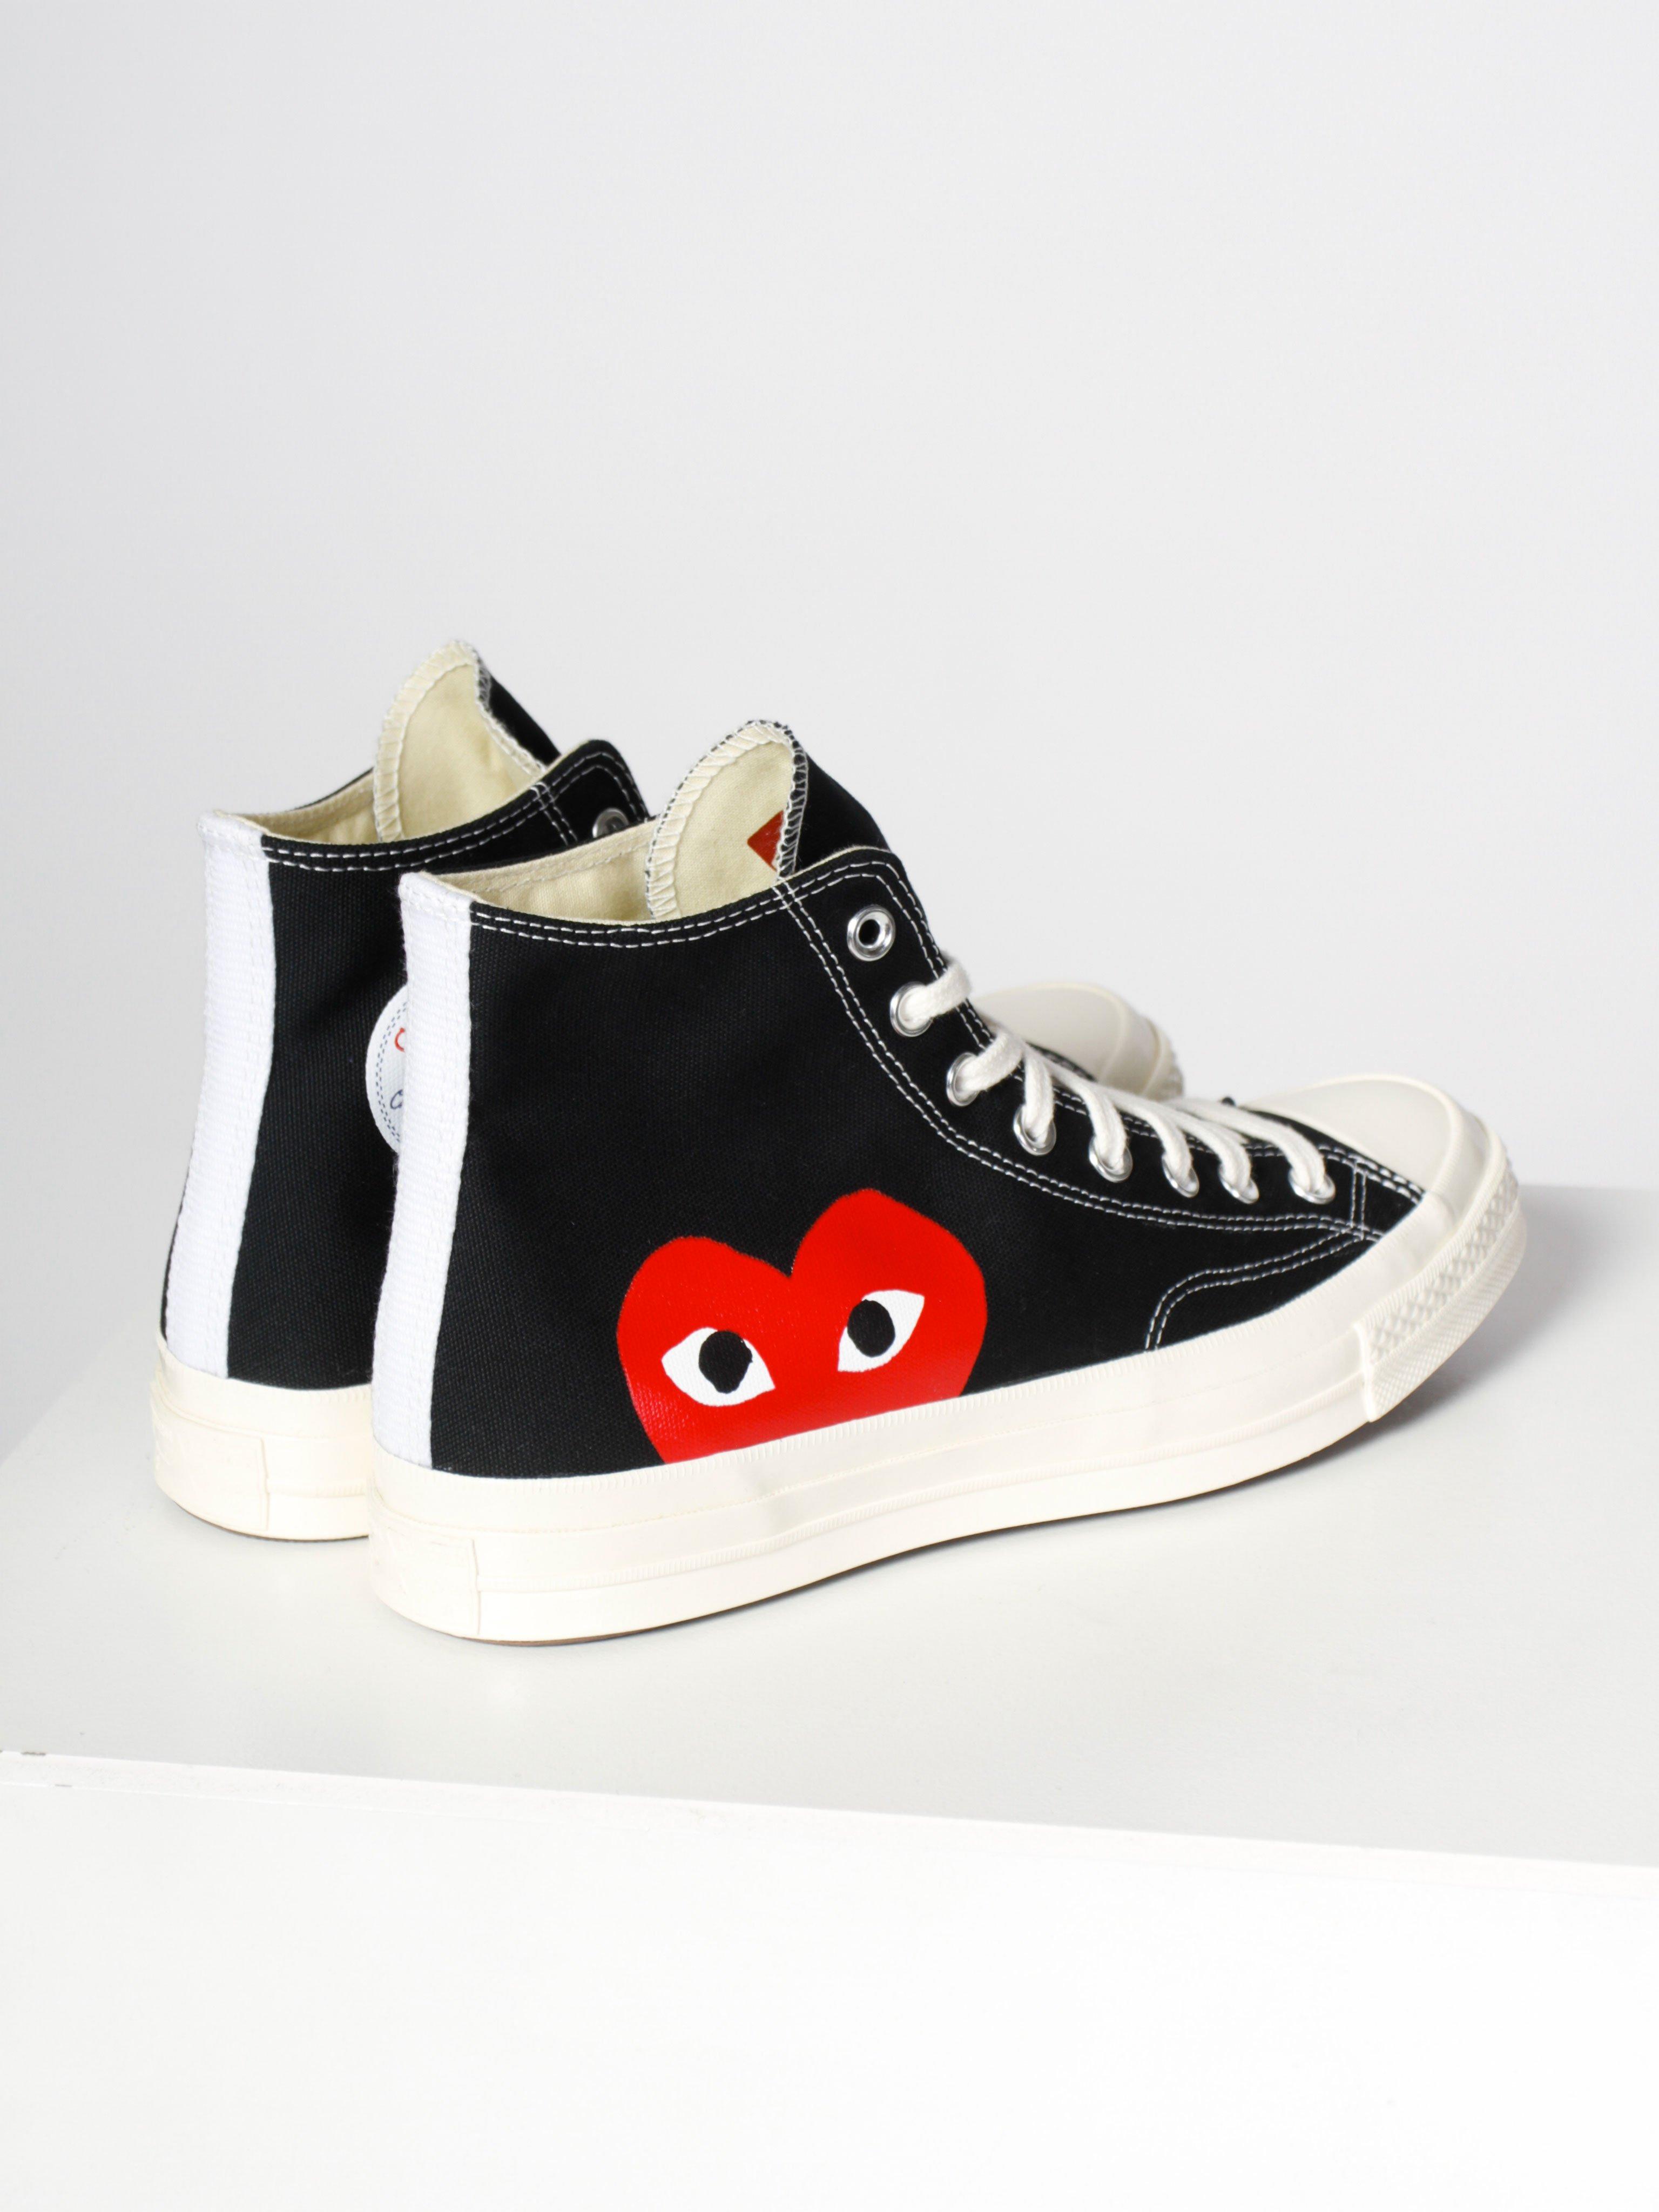 Red Heart Convers Factory Sale, SAVE 40% - aveclumiere.com